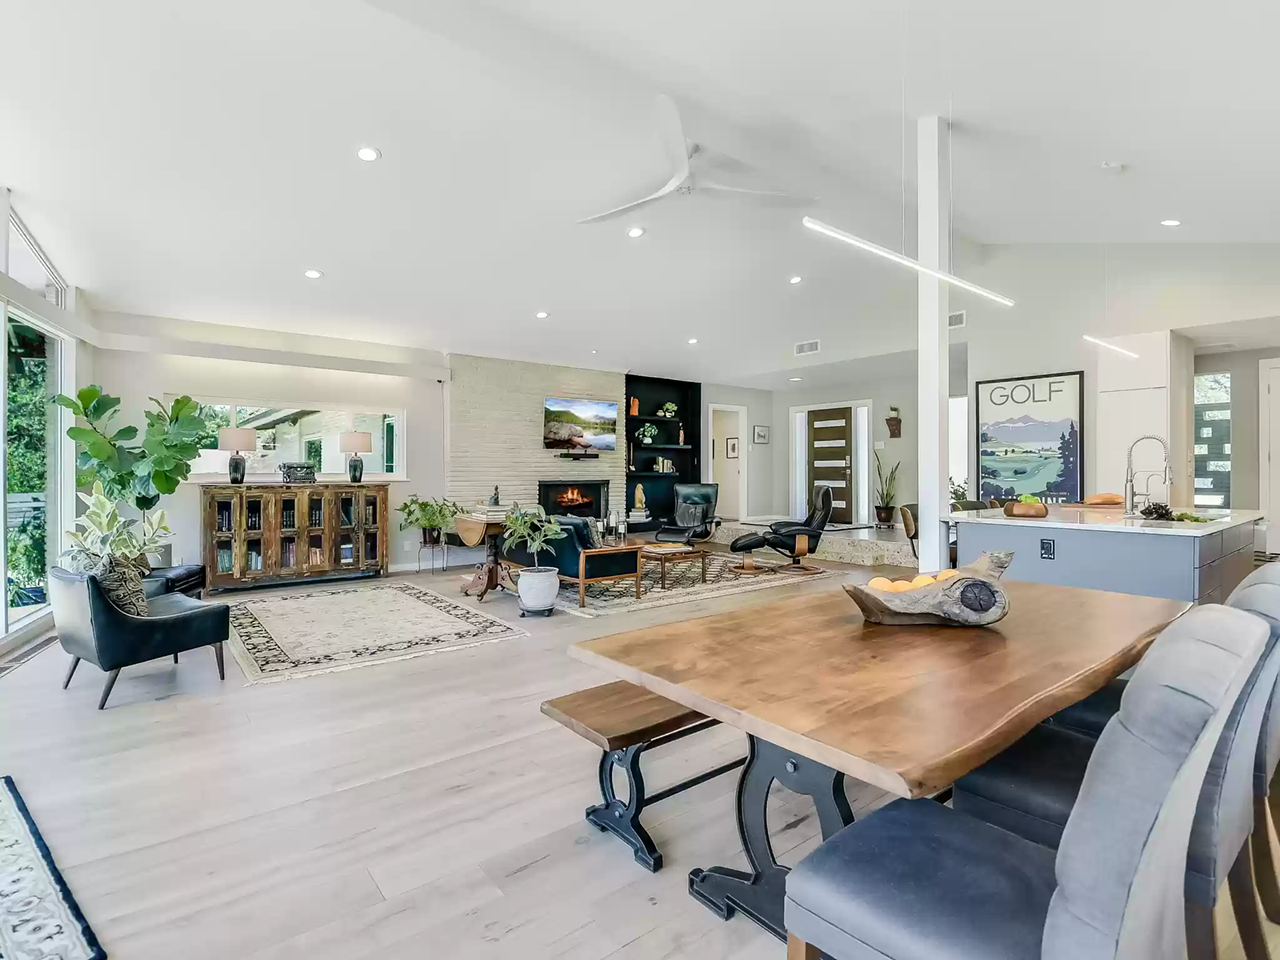 This fully restored Mid-Century Modern home in San Antonio is now on the market